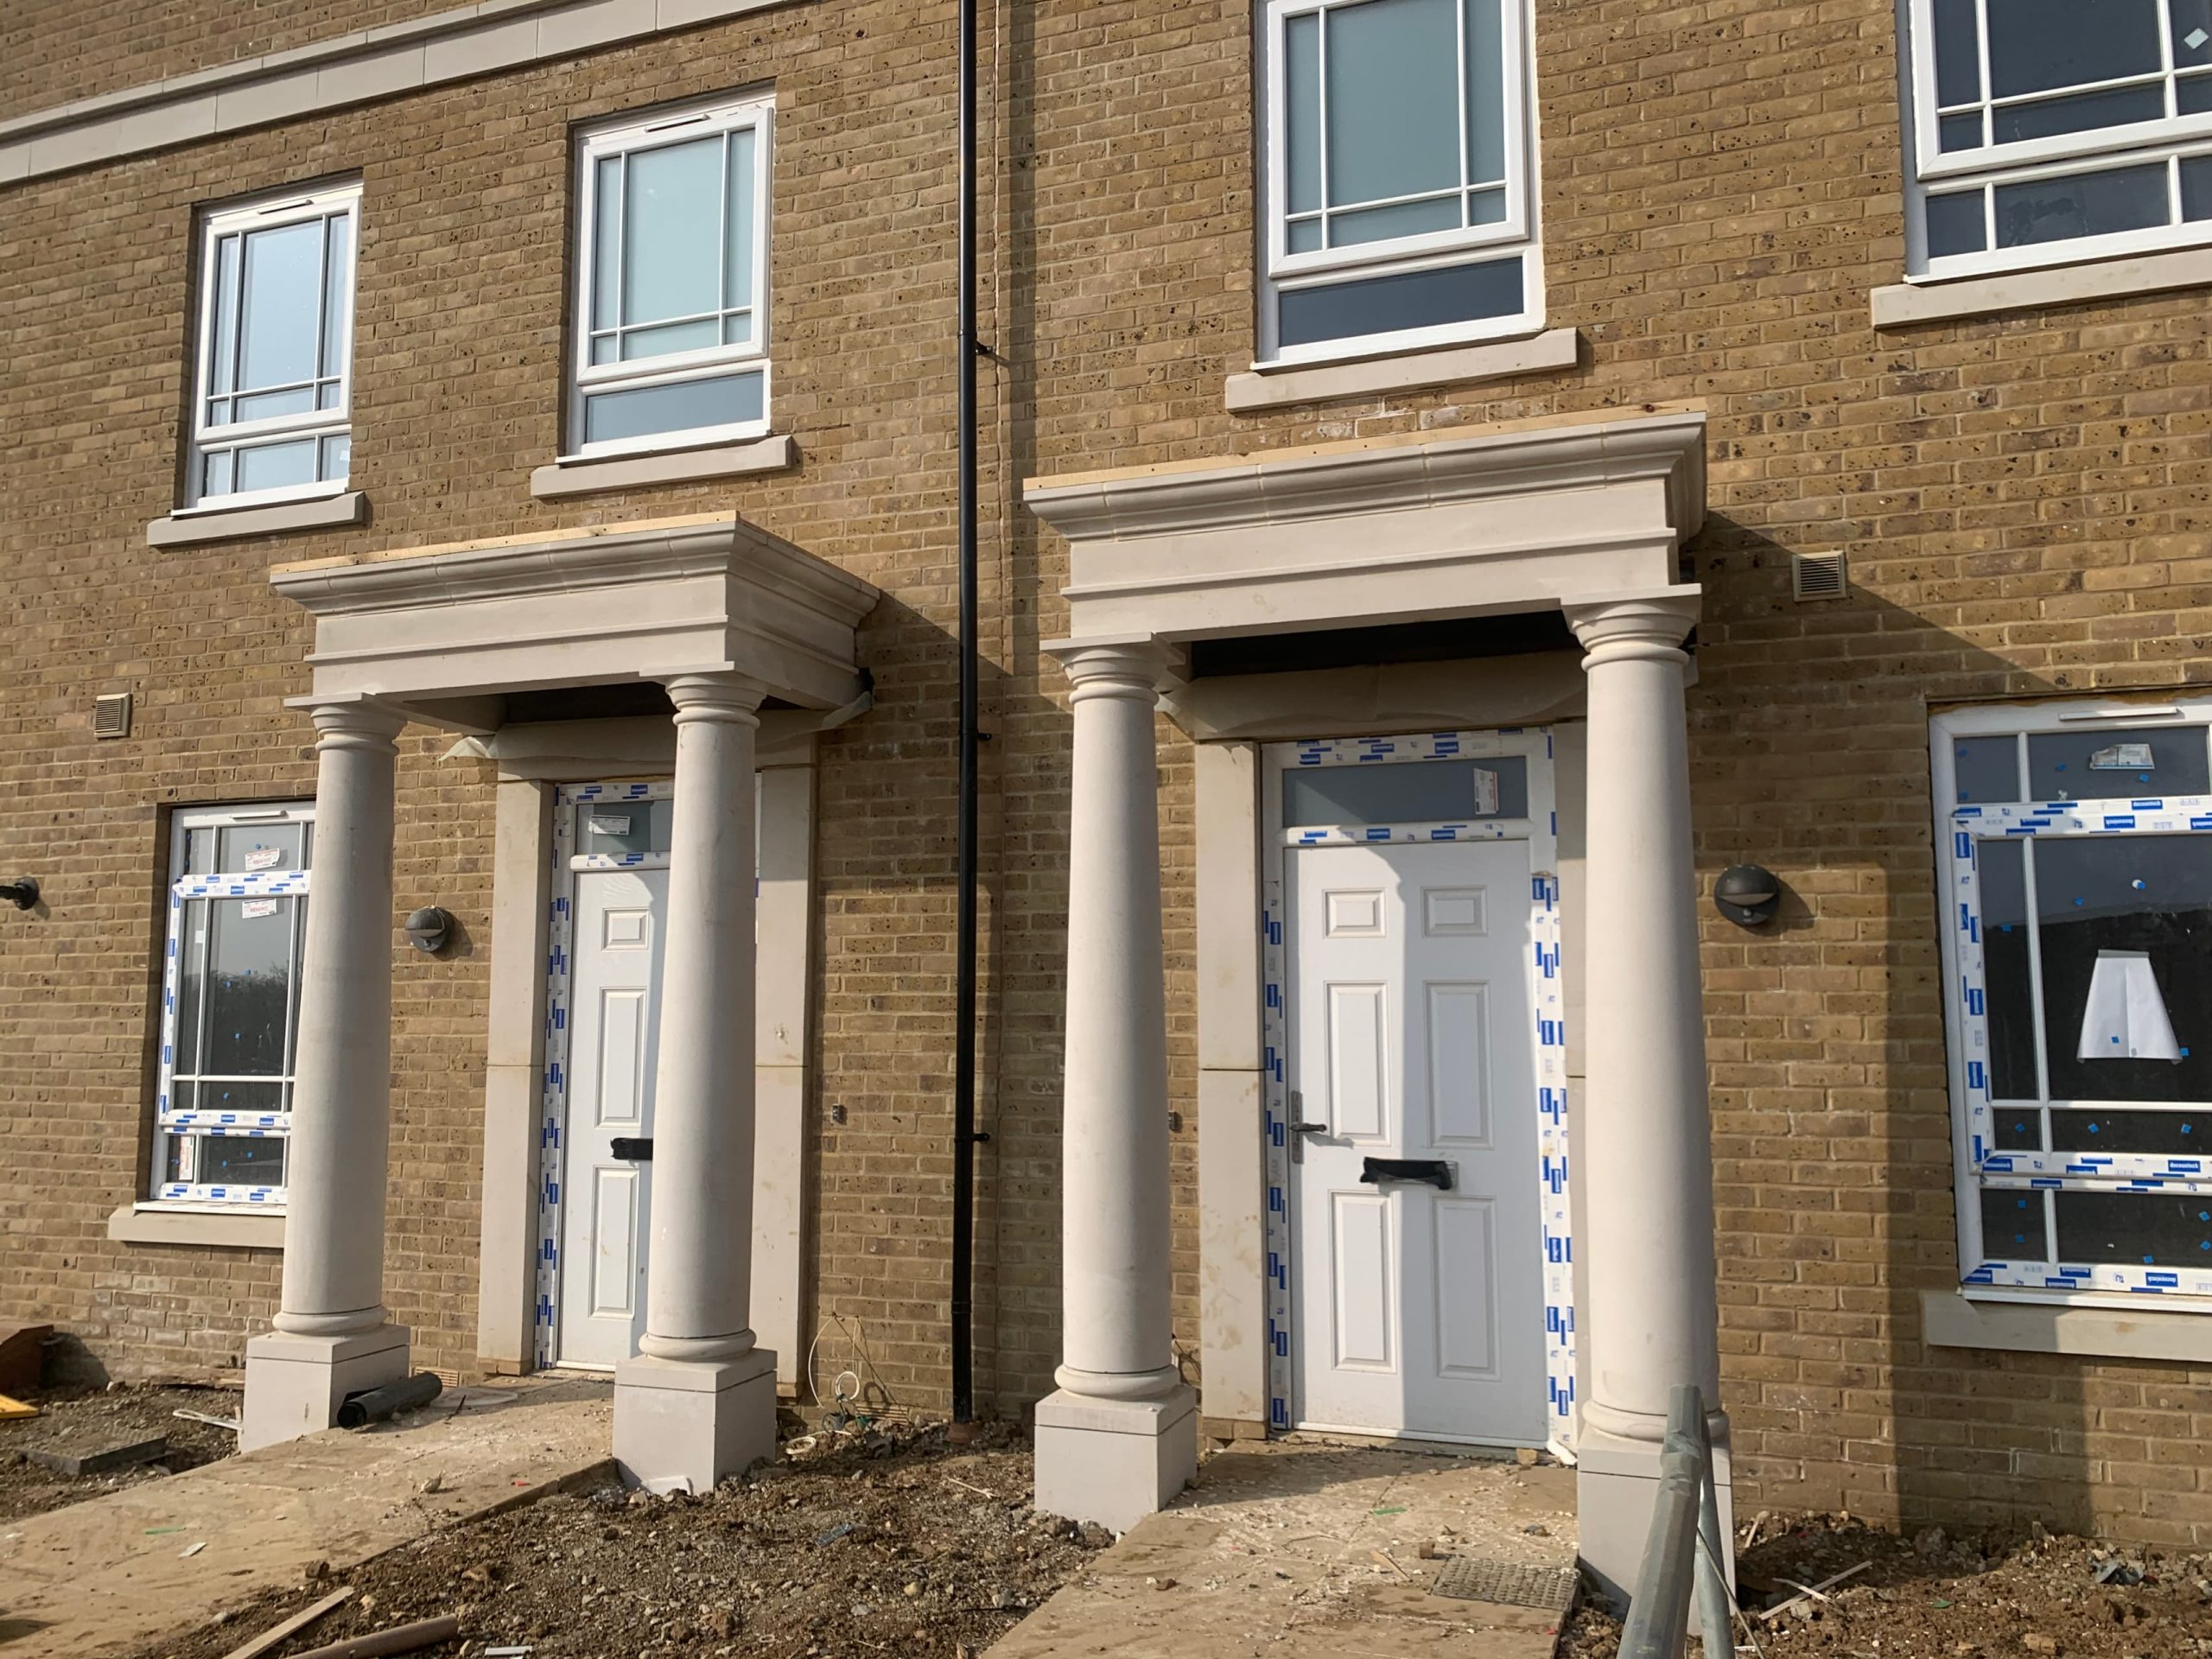 Beautiful stone portico ideas, porch pictures, and designs. For top kent entrance-porches built in the UK by Malling Masonry